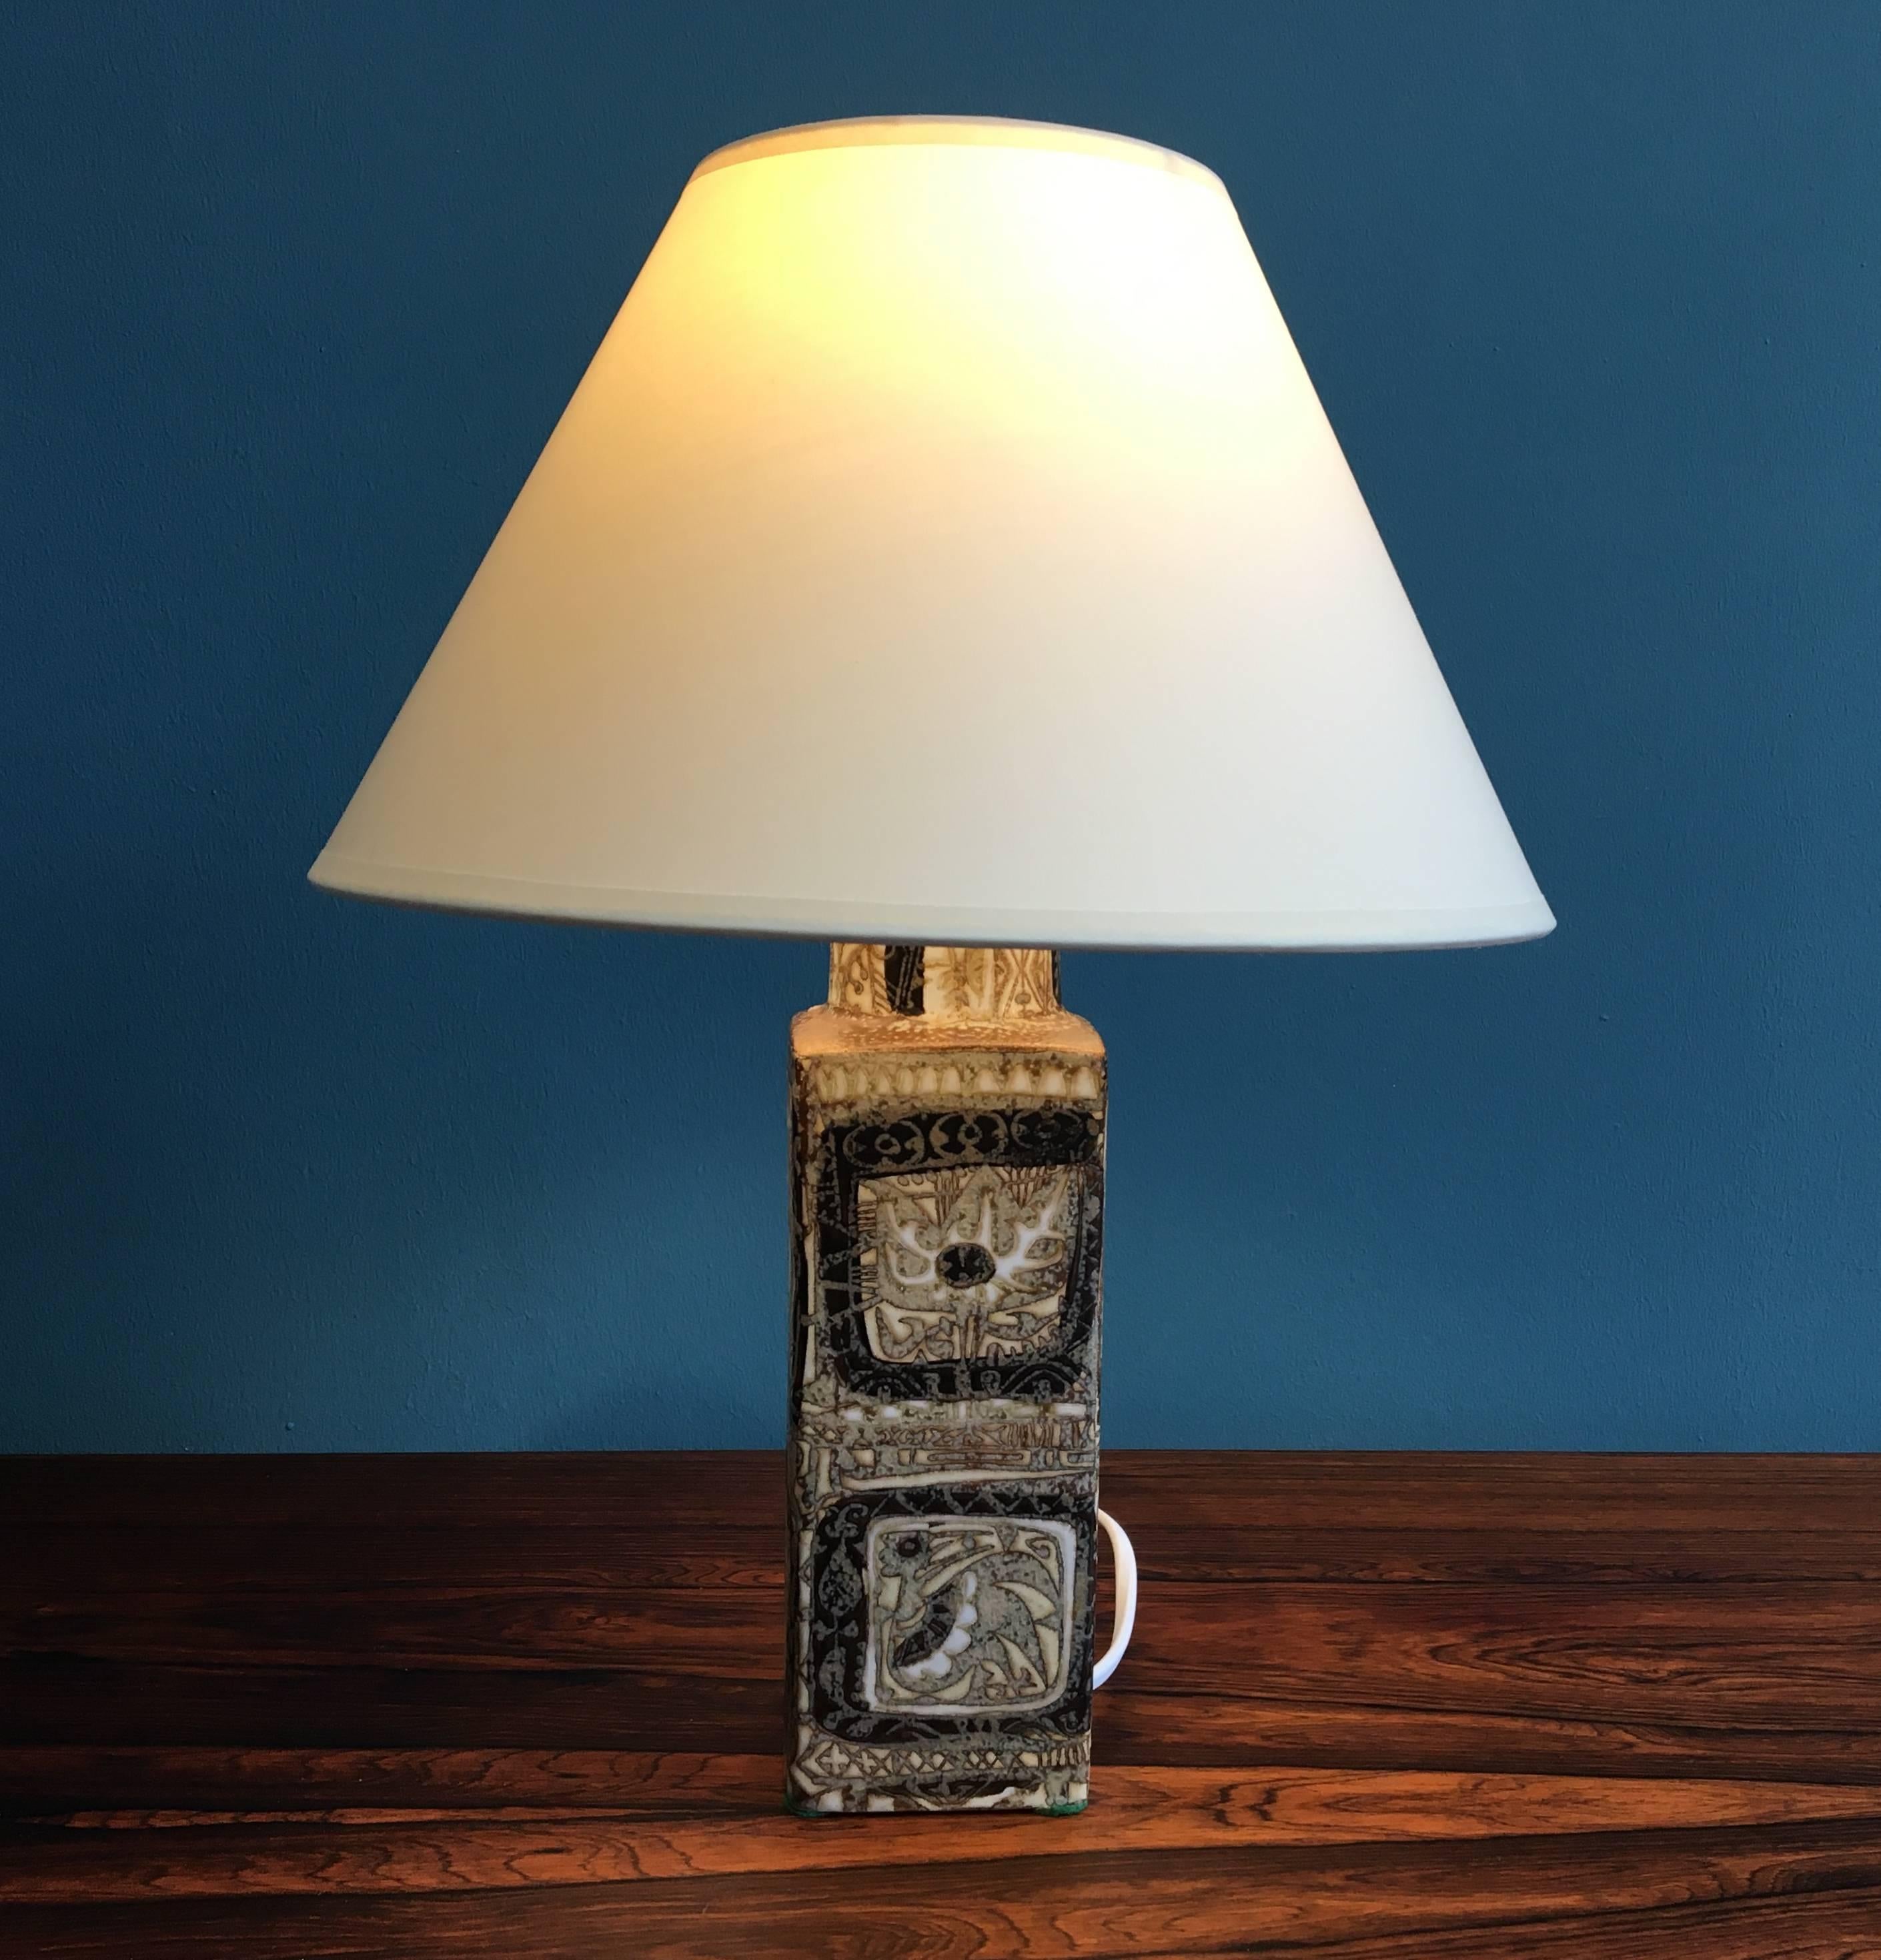 Danish Mid-Century Vintage Table Lamp by Nils Thorsson, 1960s